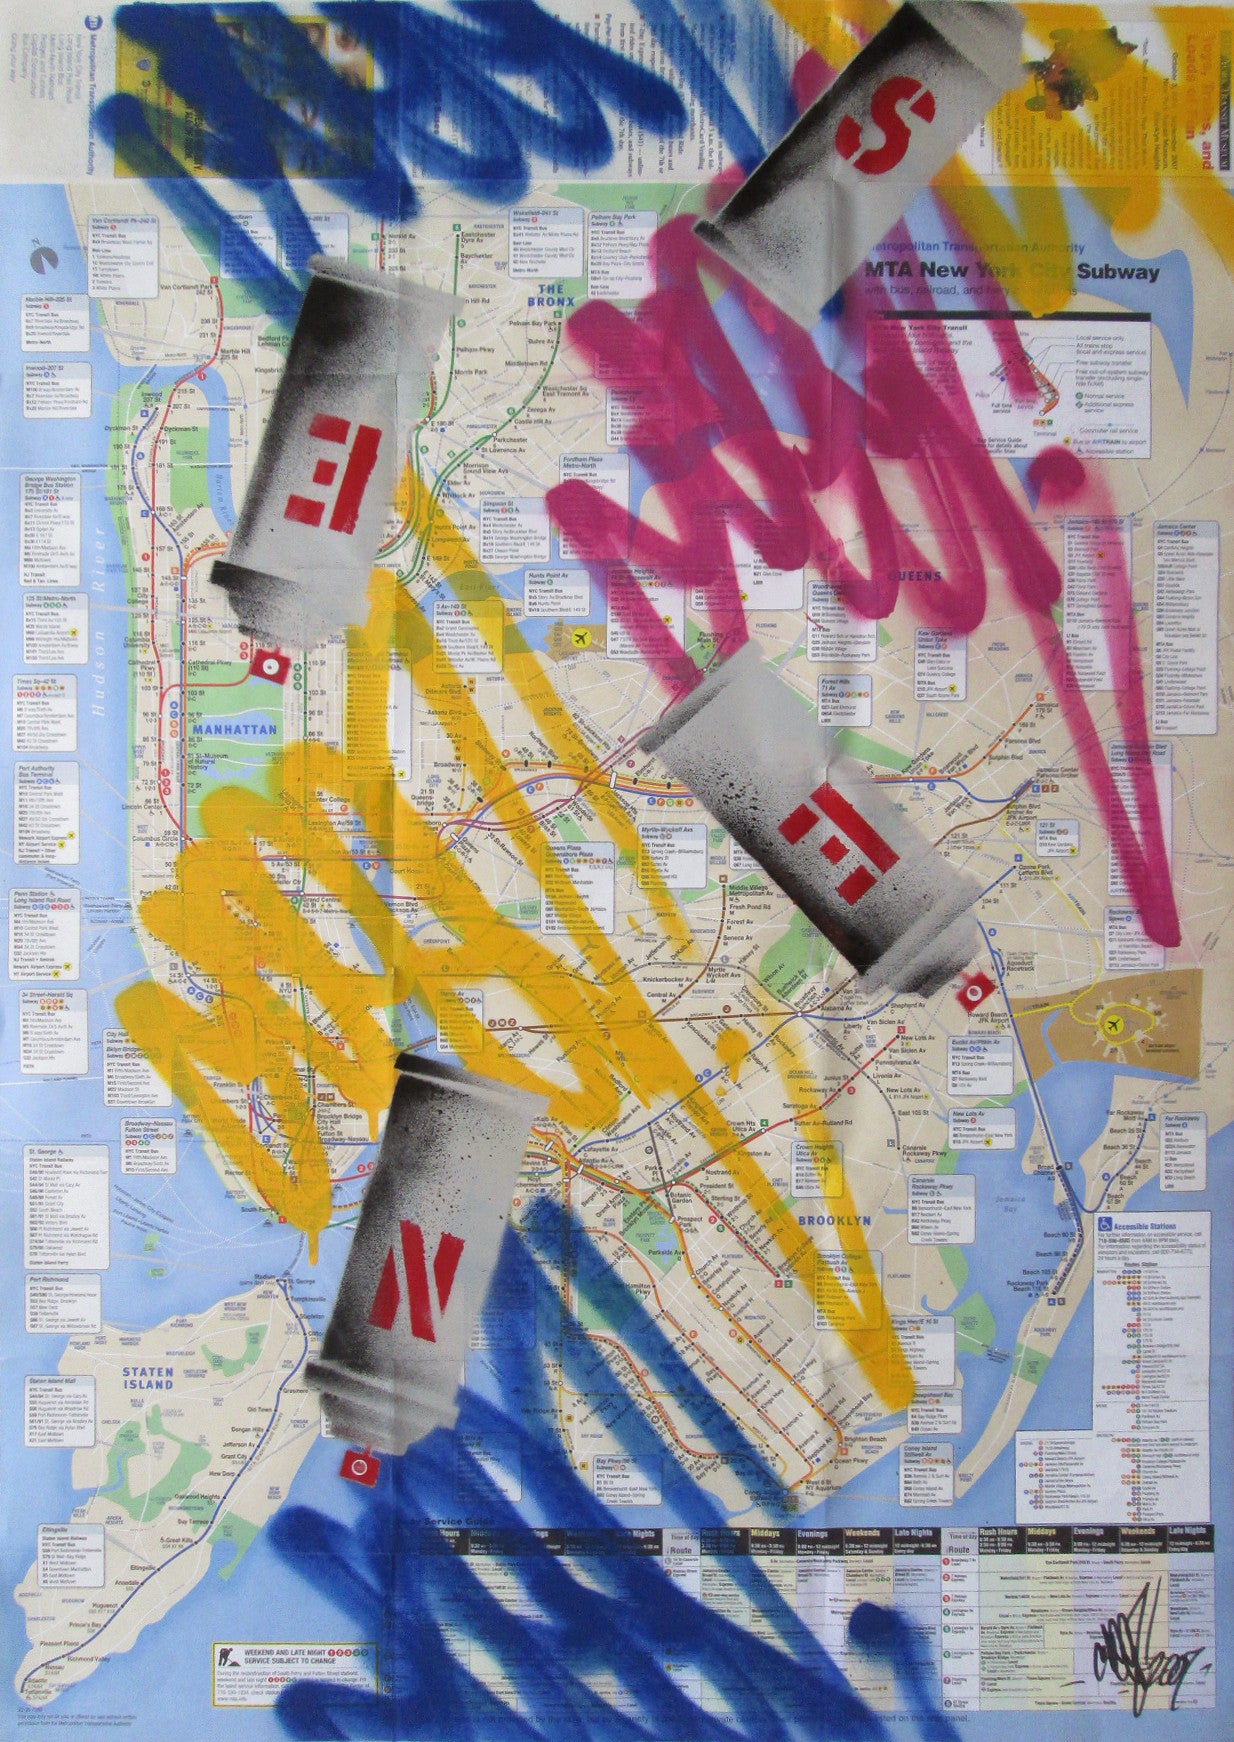 GRAFFITI ARTIST SEEN -  "Cans & Tags 1" NYC Map